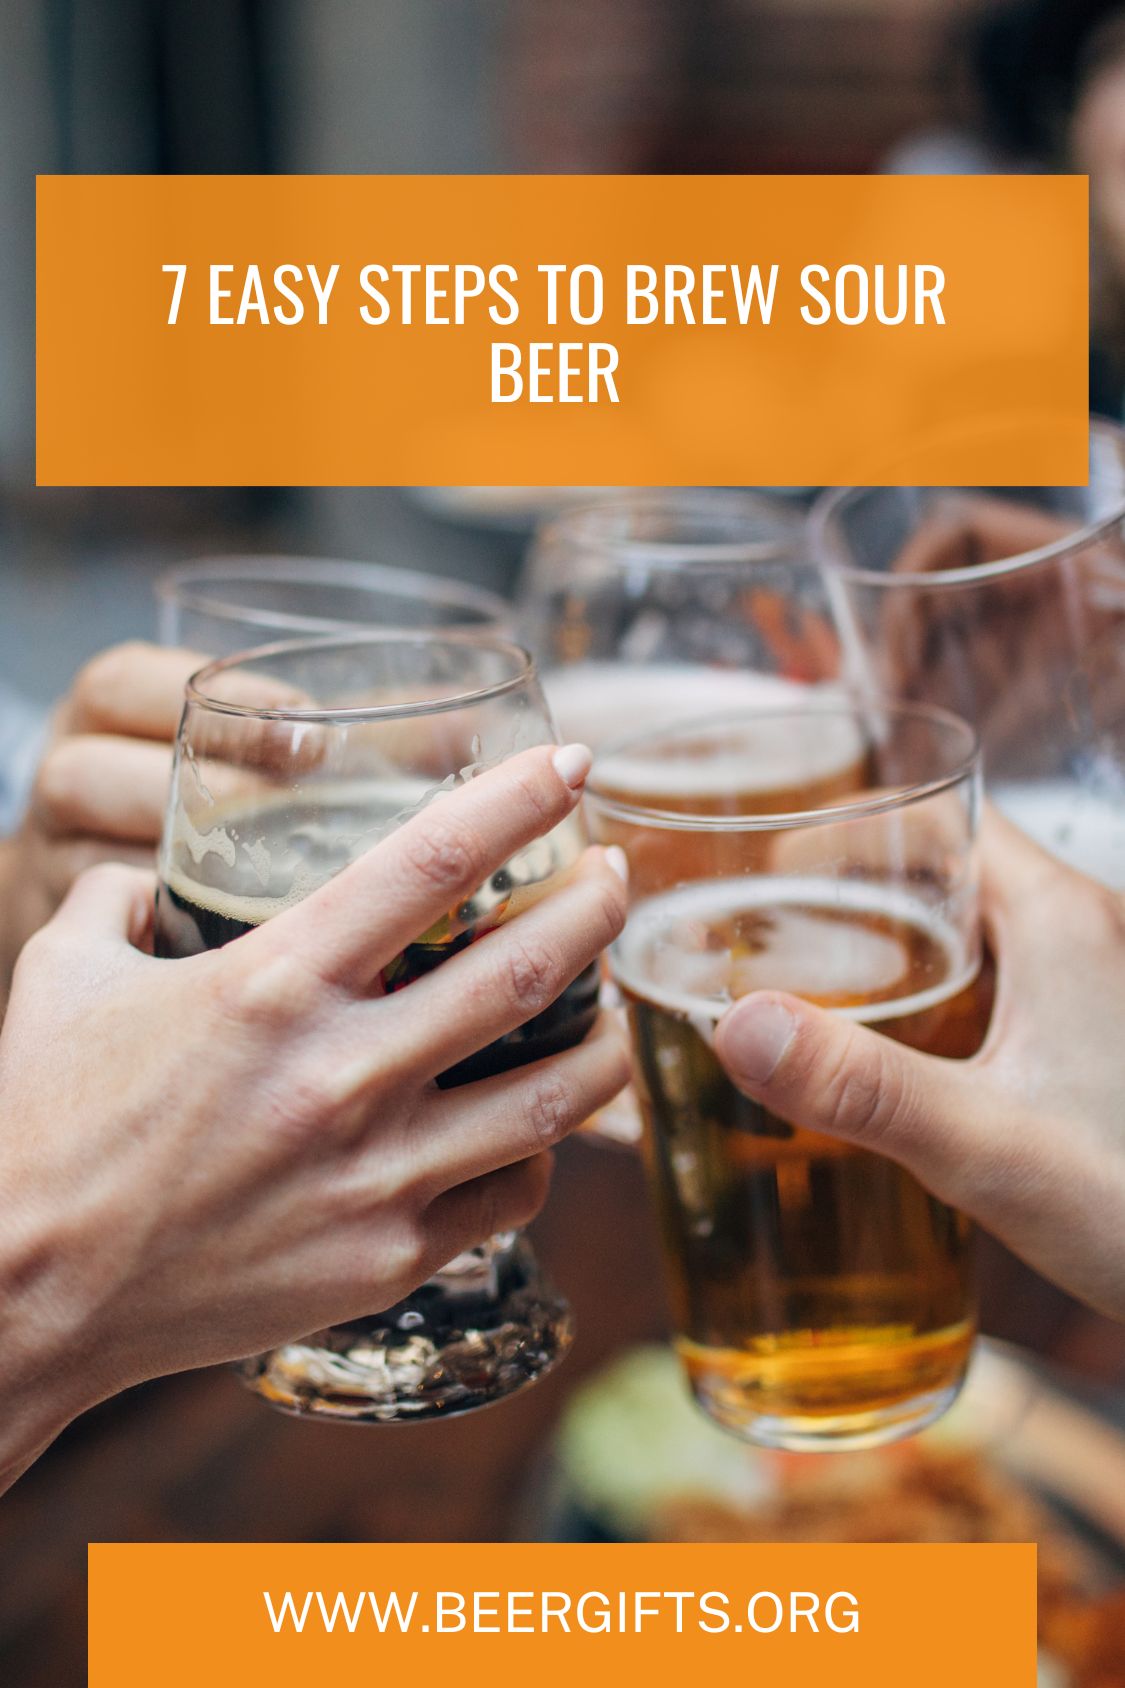 7 Easy Steps to Brew Sour Beer1